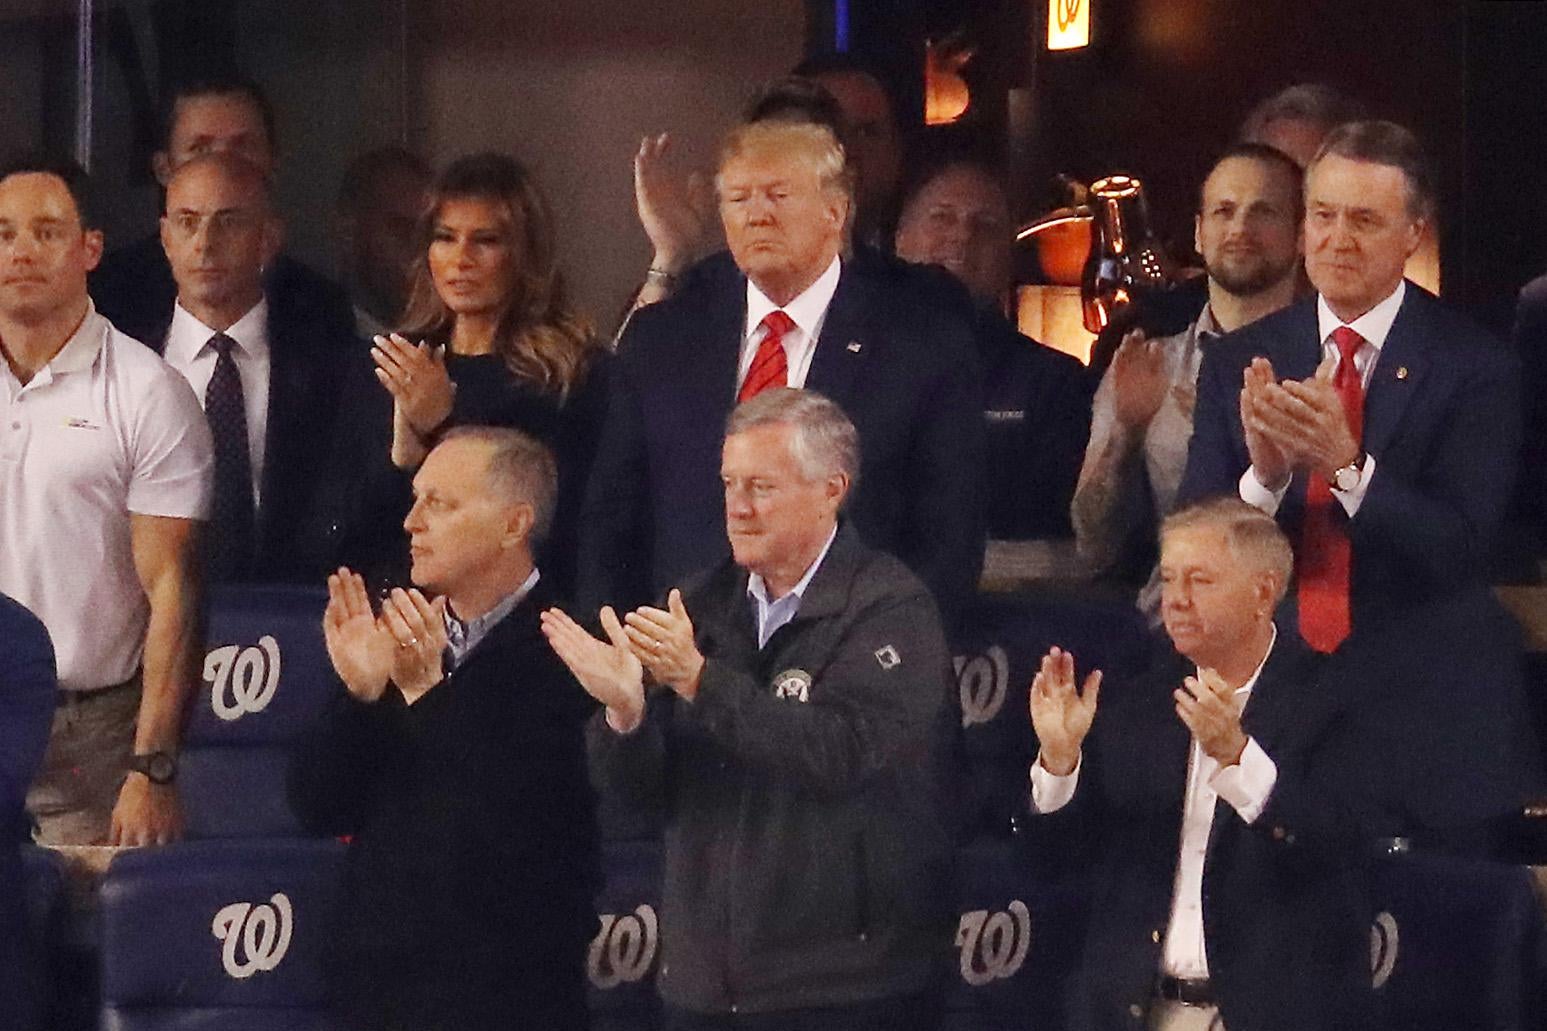 Donald Trump, Melania Trump, Lindsey Graham, and others clapping during Game Five of the 2019 World Series at Nationals Park in Washington on Oct. 27.